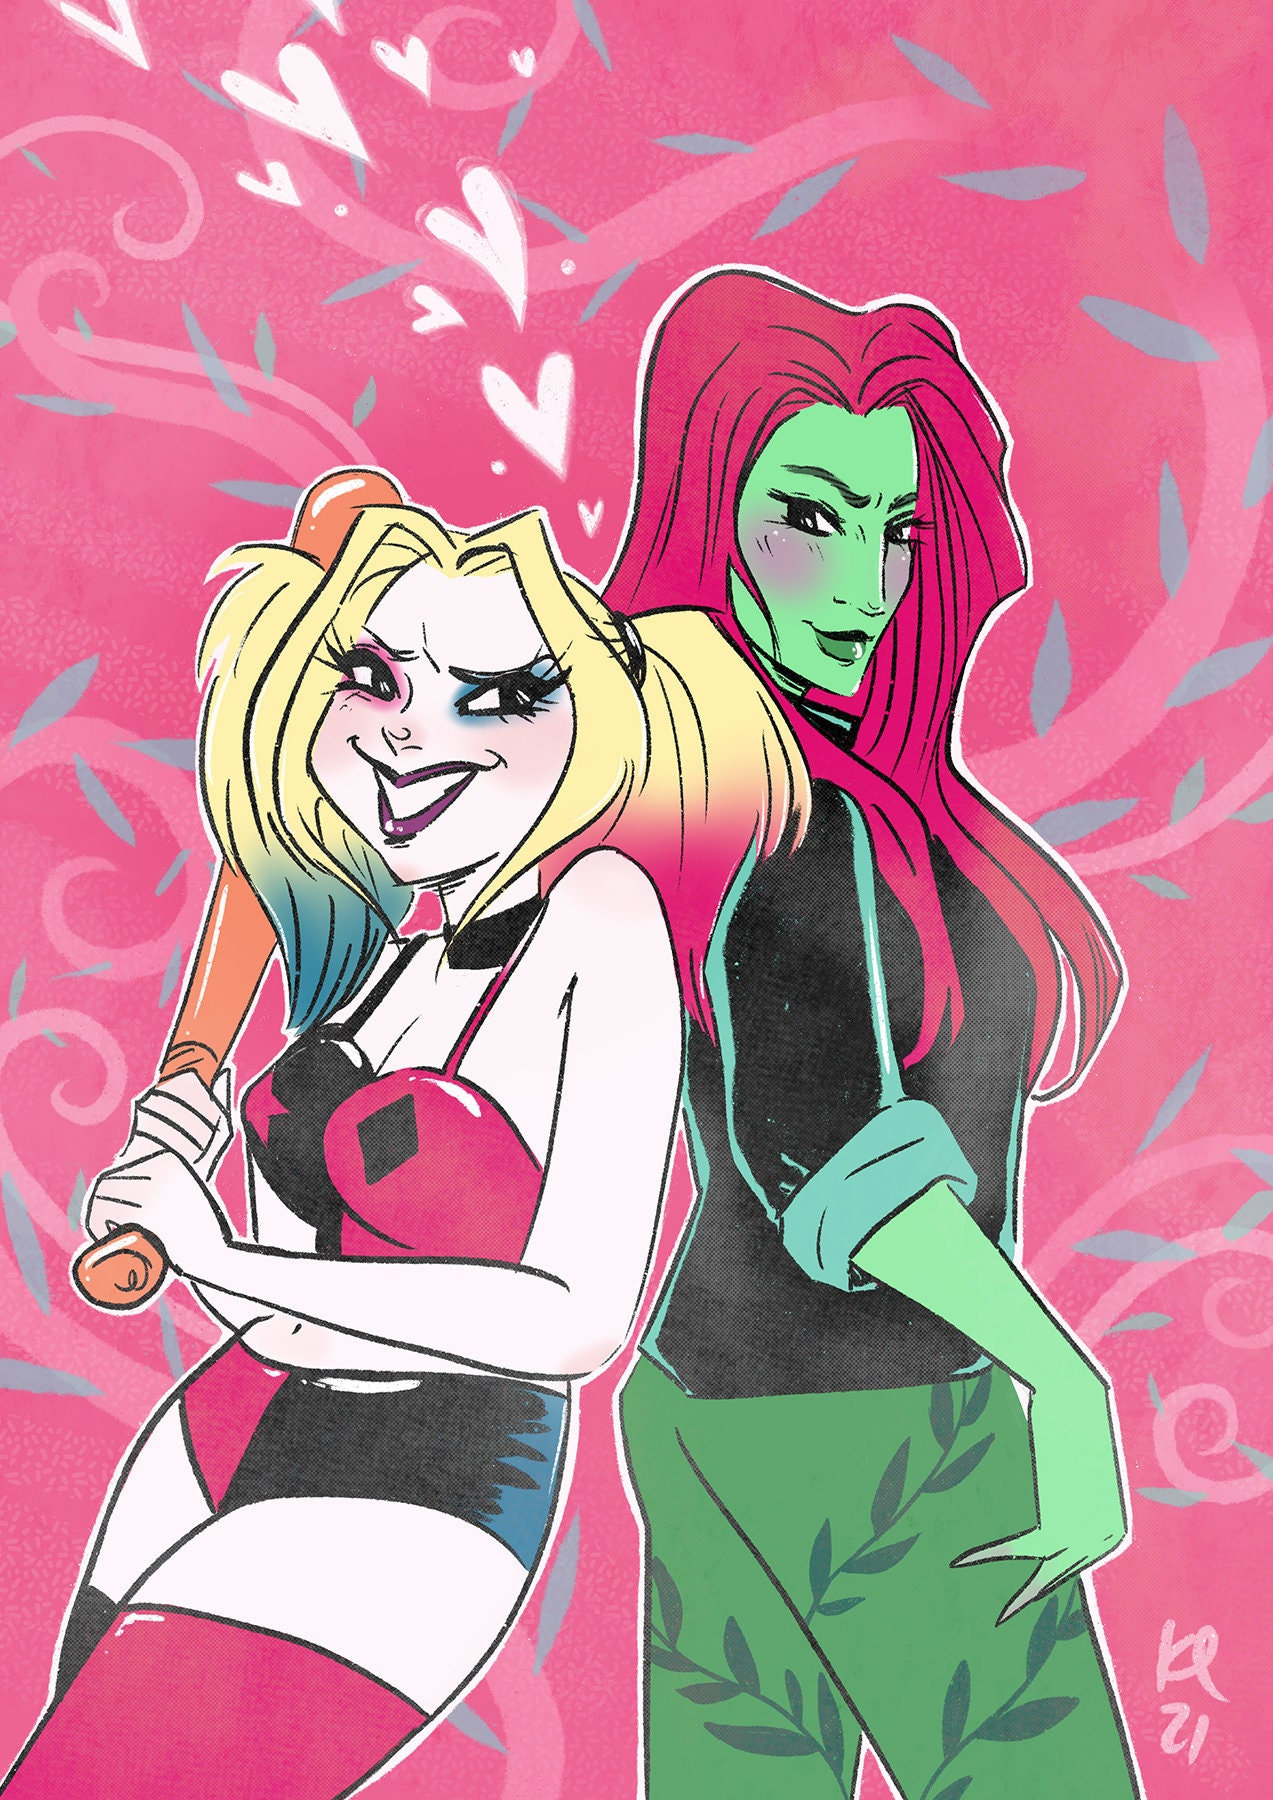 The Harley & the Ivy Print Harley Quinn and Poison Ivy - Etsy